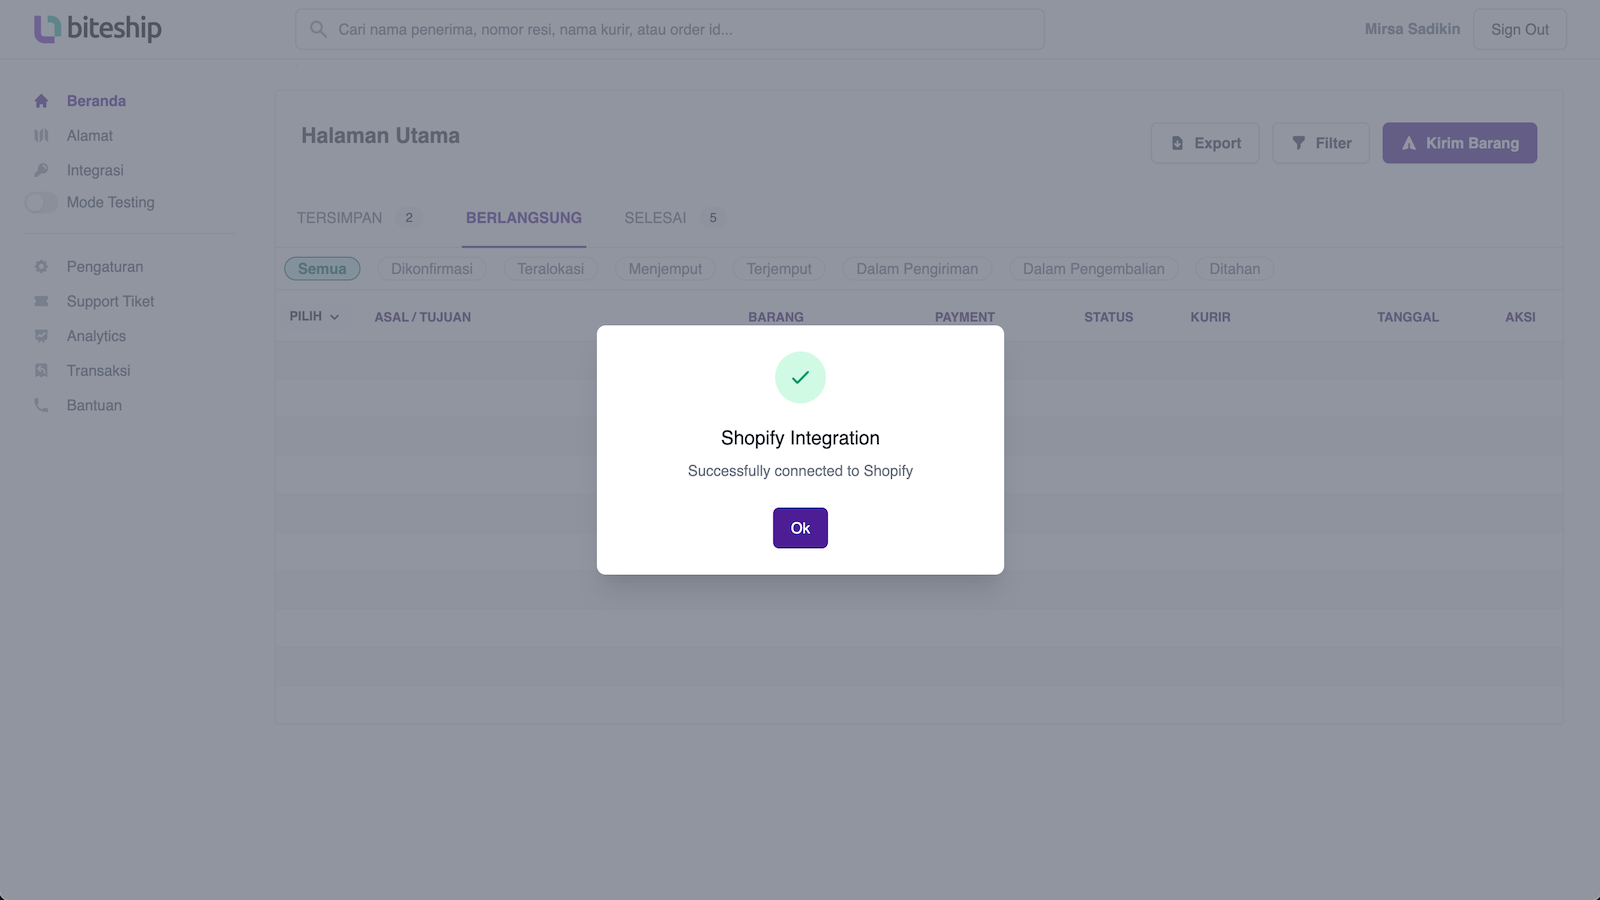 Biteship Integration for Shopify is a success